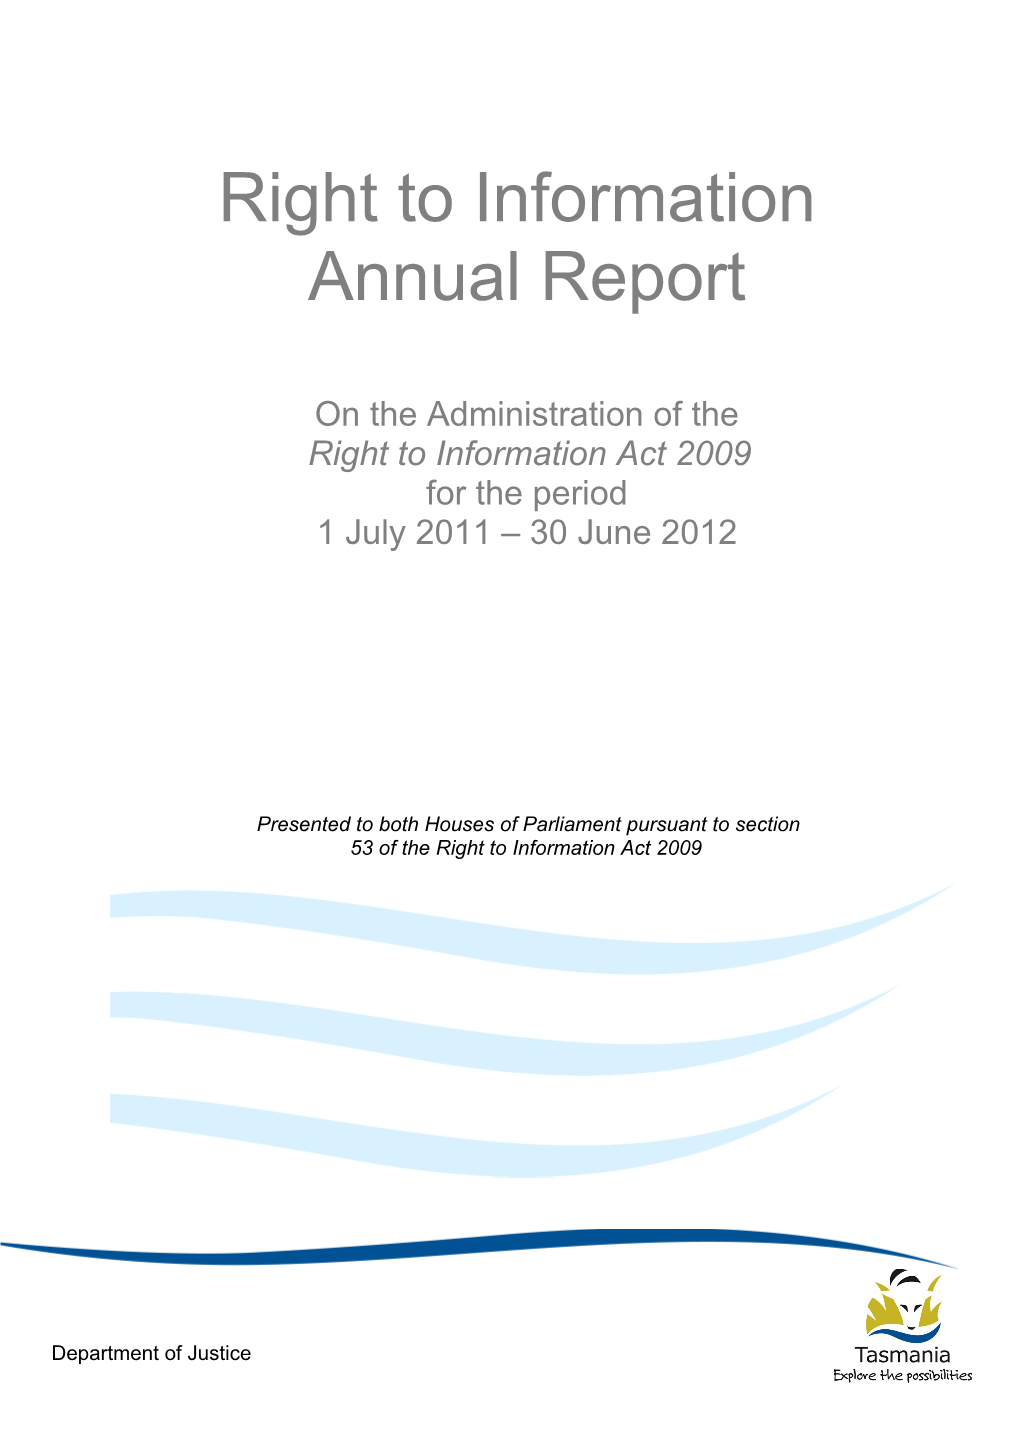 Freedom of Information Annual Report